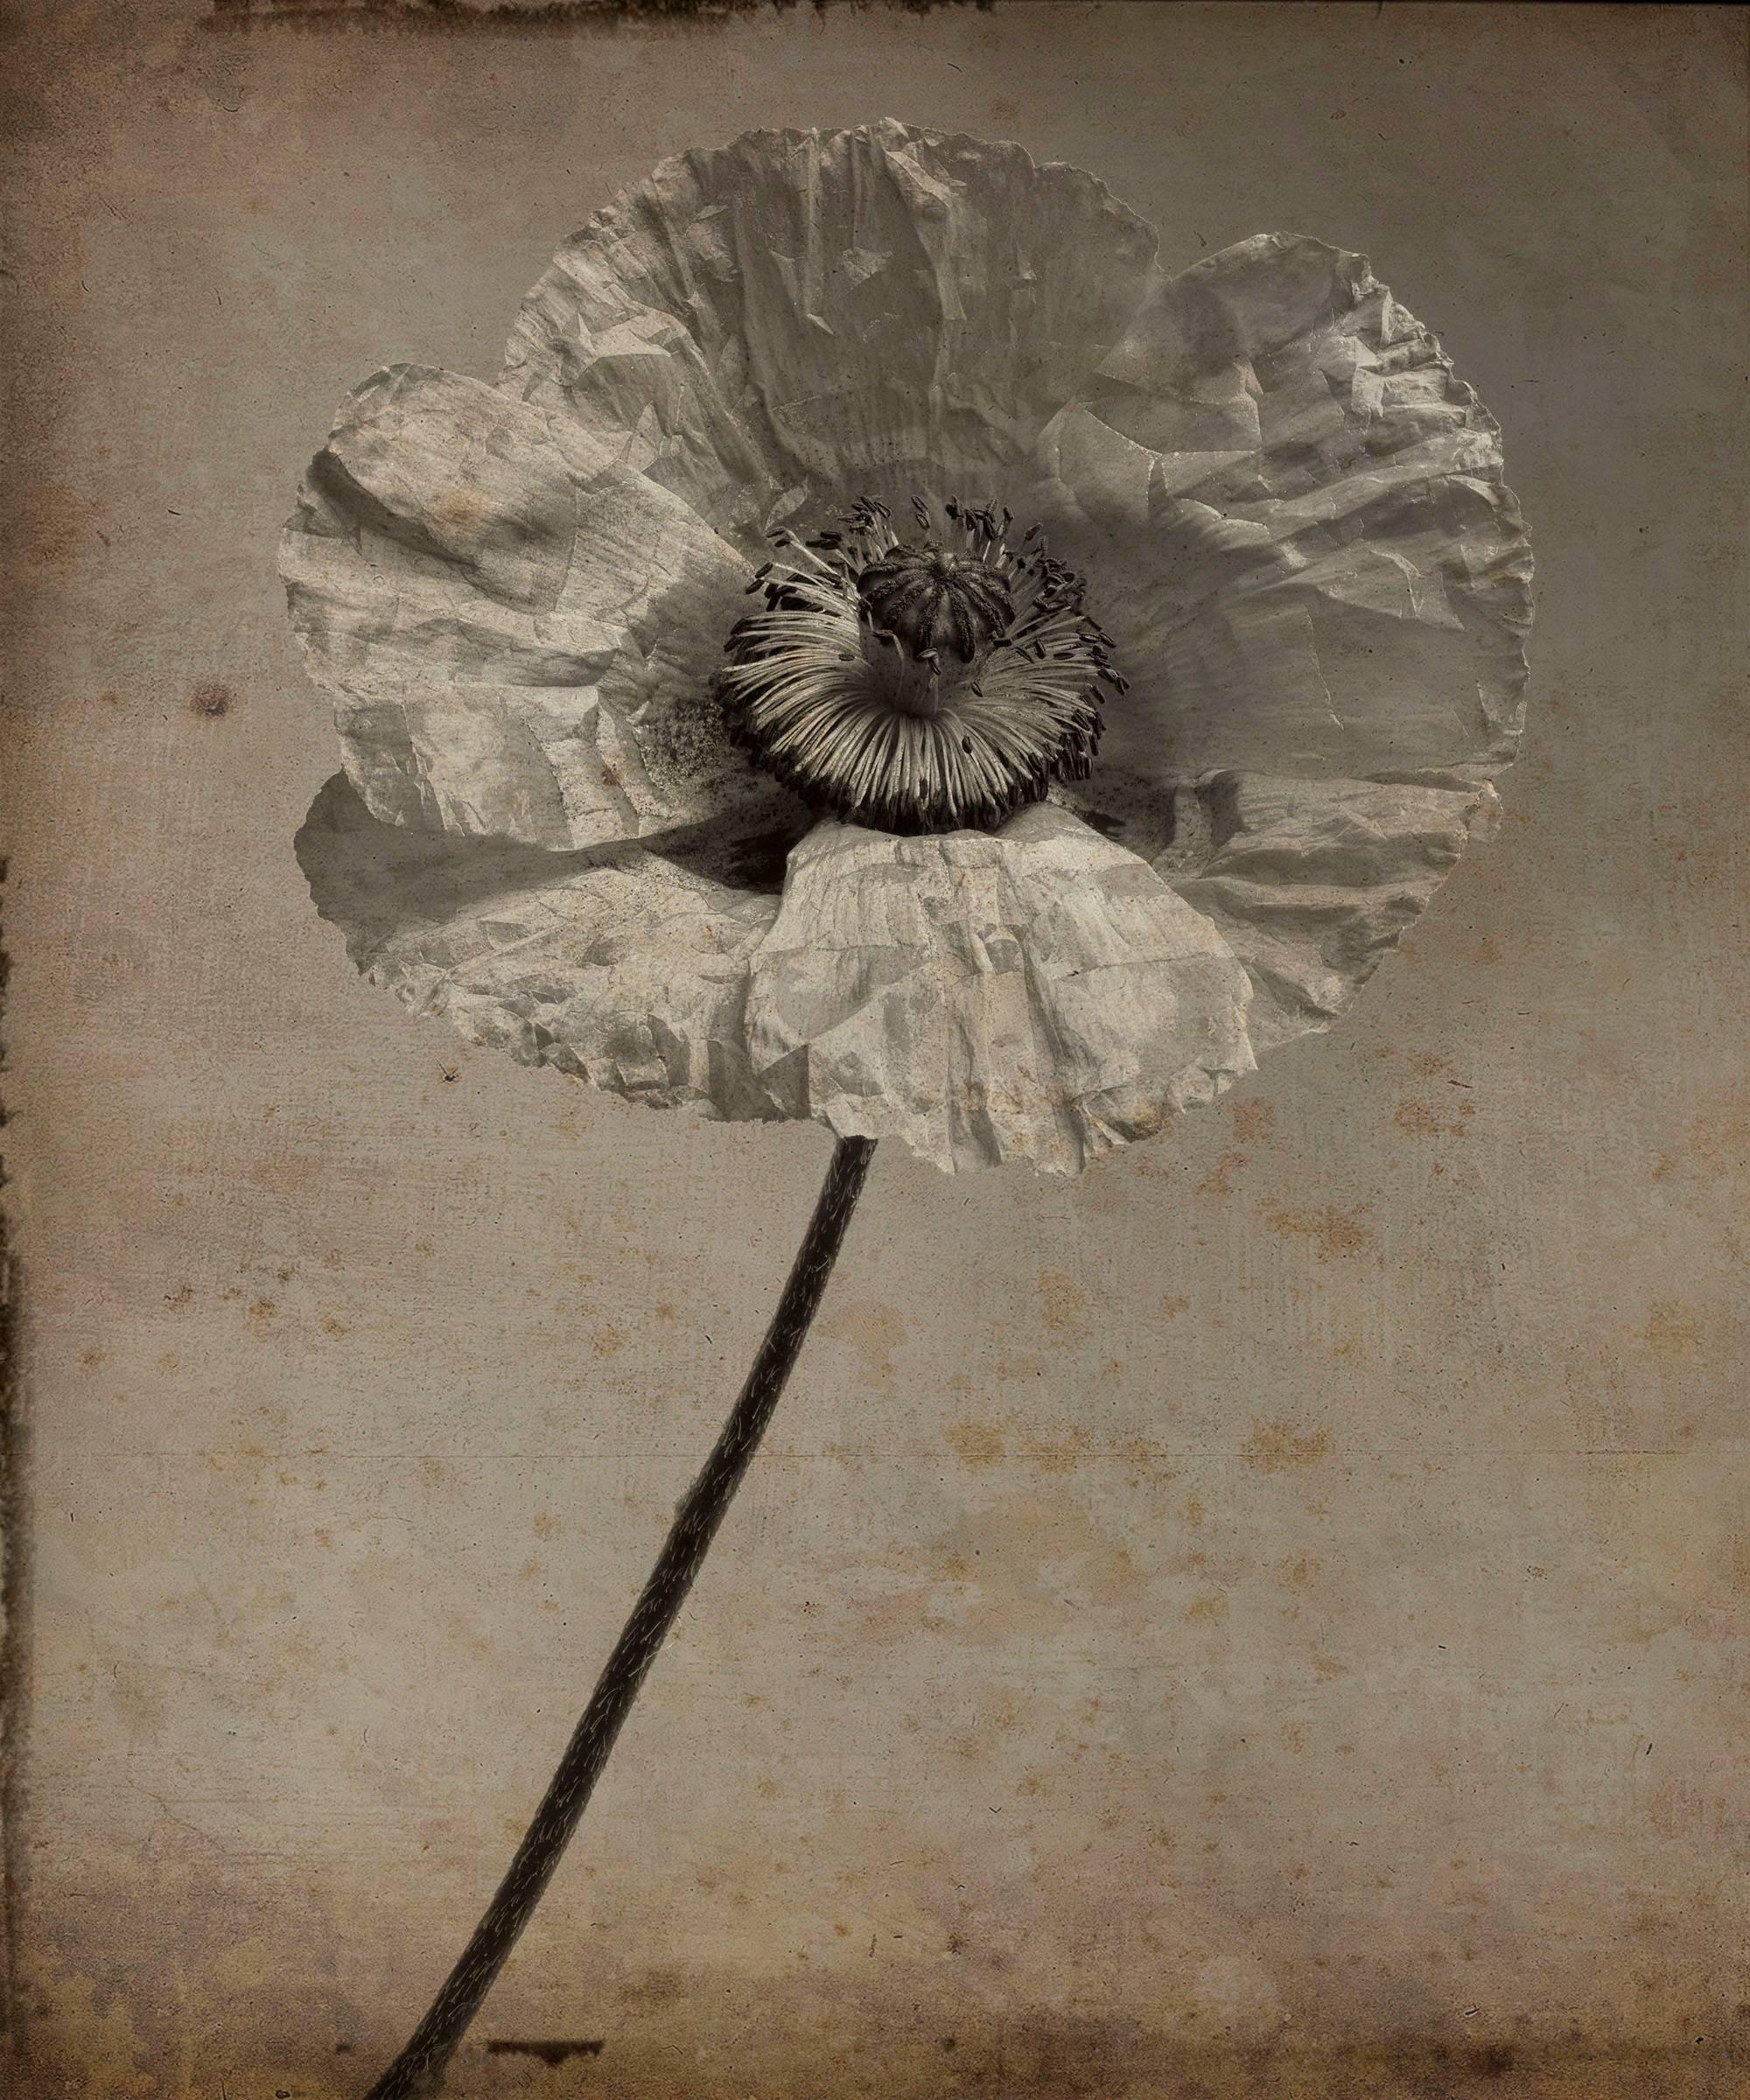 Poppy Flower #4 (Modern, Sepia Toned Photograph with Mixed Media)